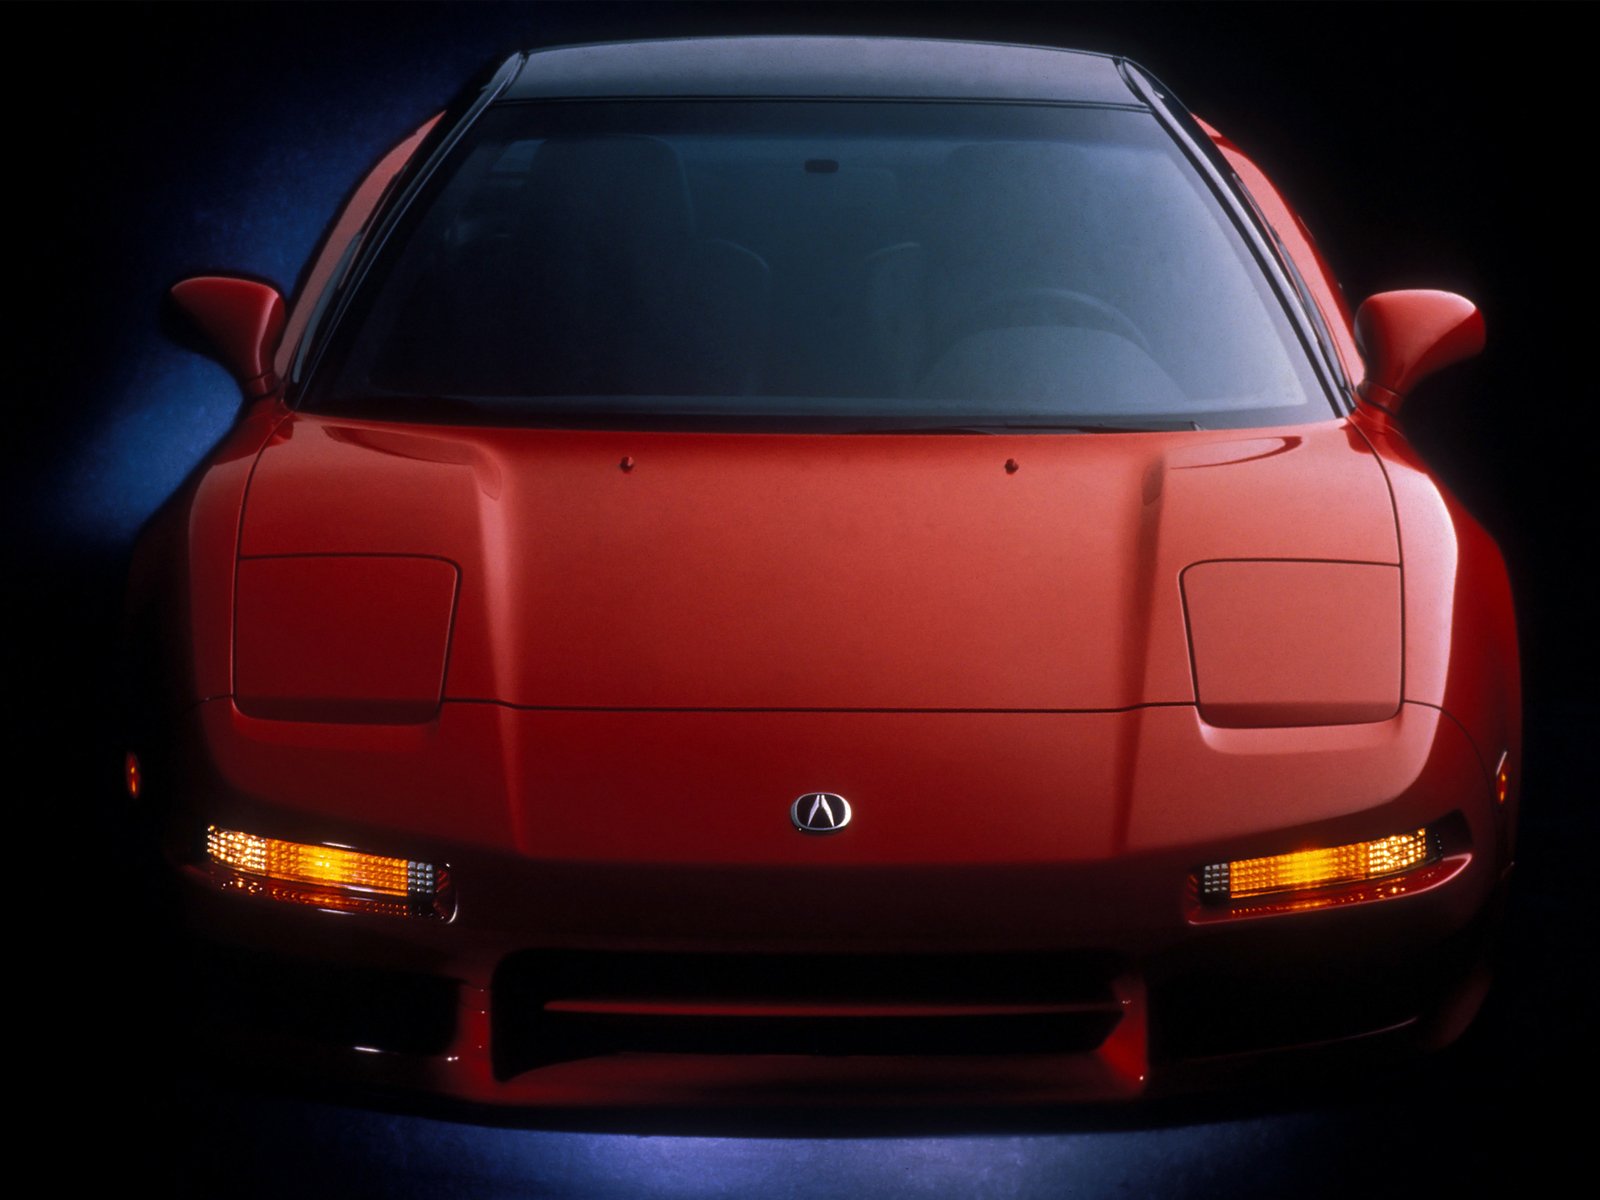 acura, Nsx, Cars, Coupe, 1991 Wallpaper